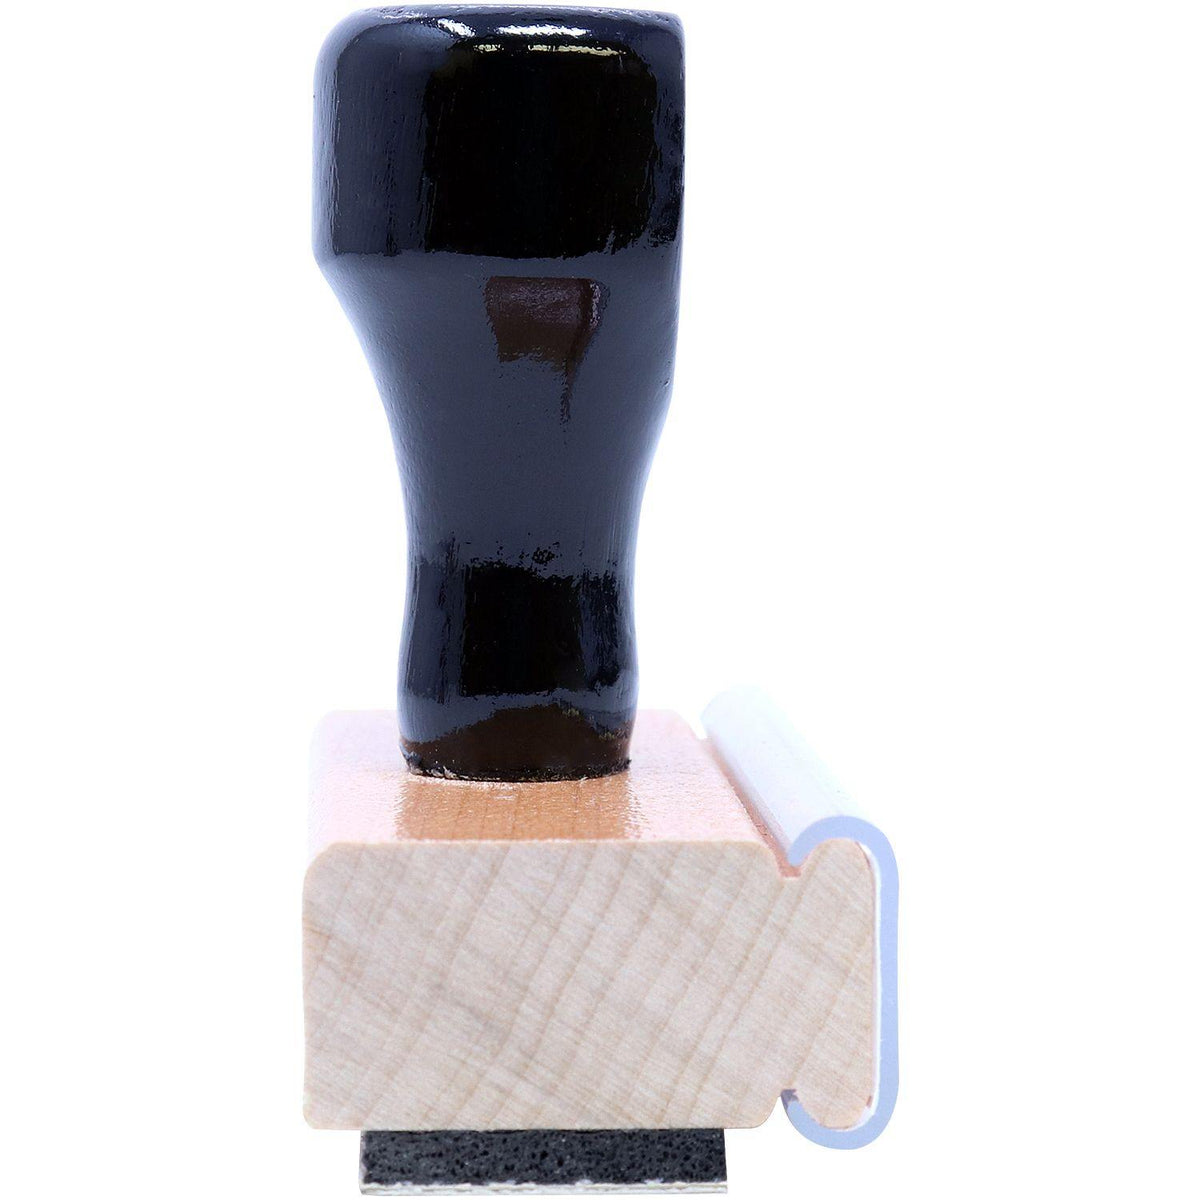 Side View of Large Narrow Font Return Receipt Requested Rubber Stamp